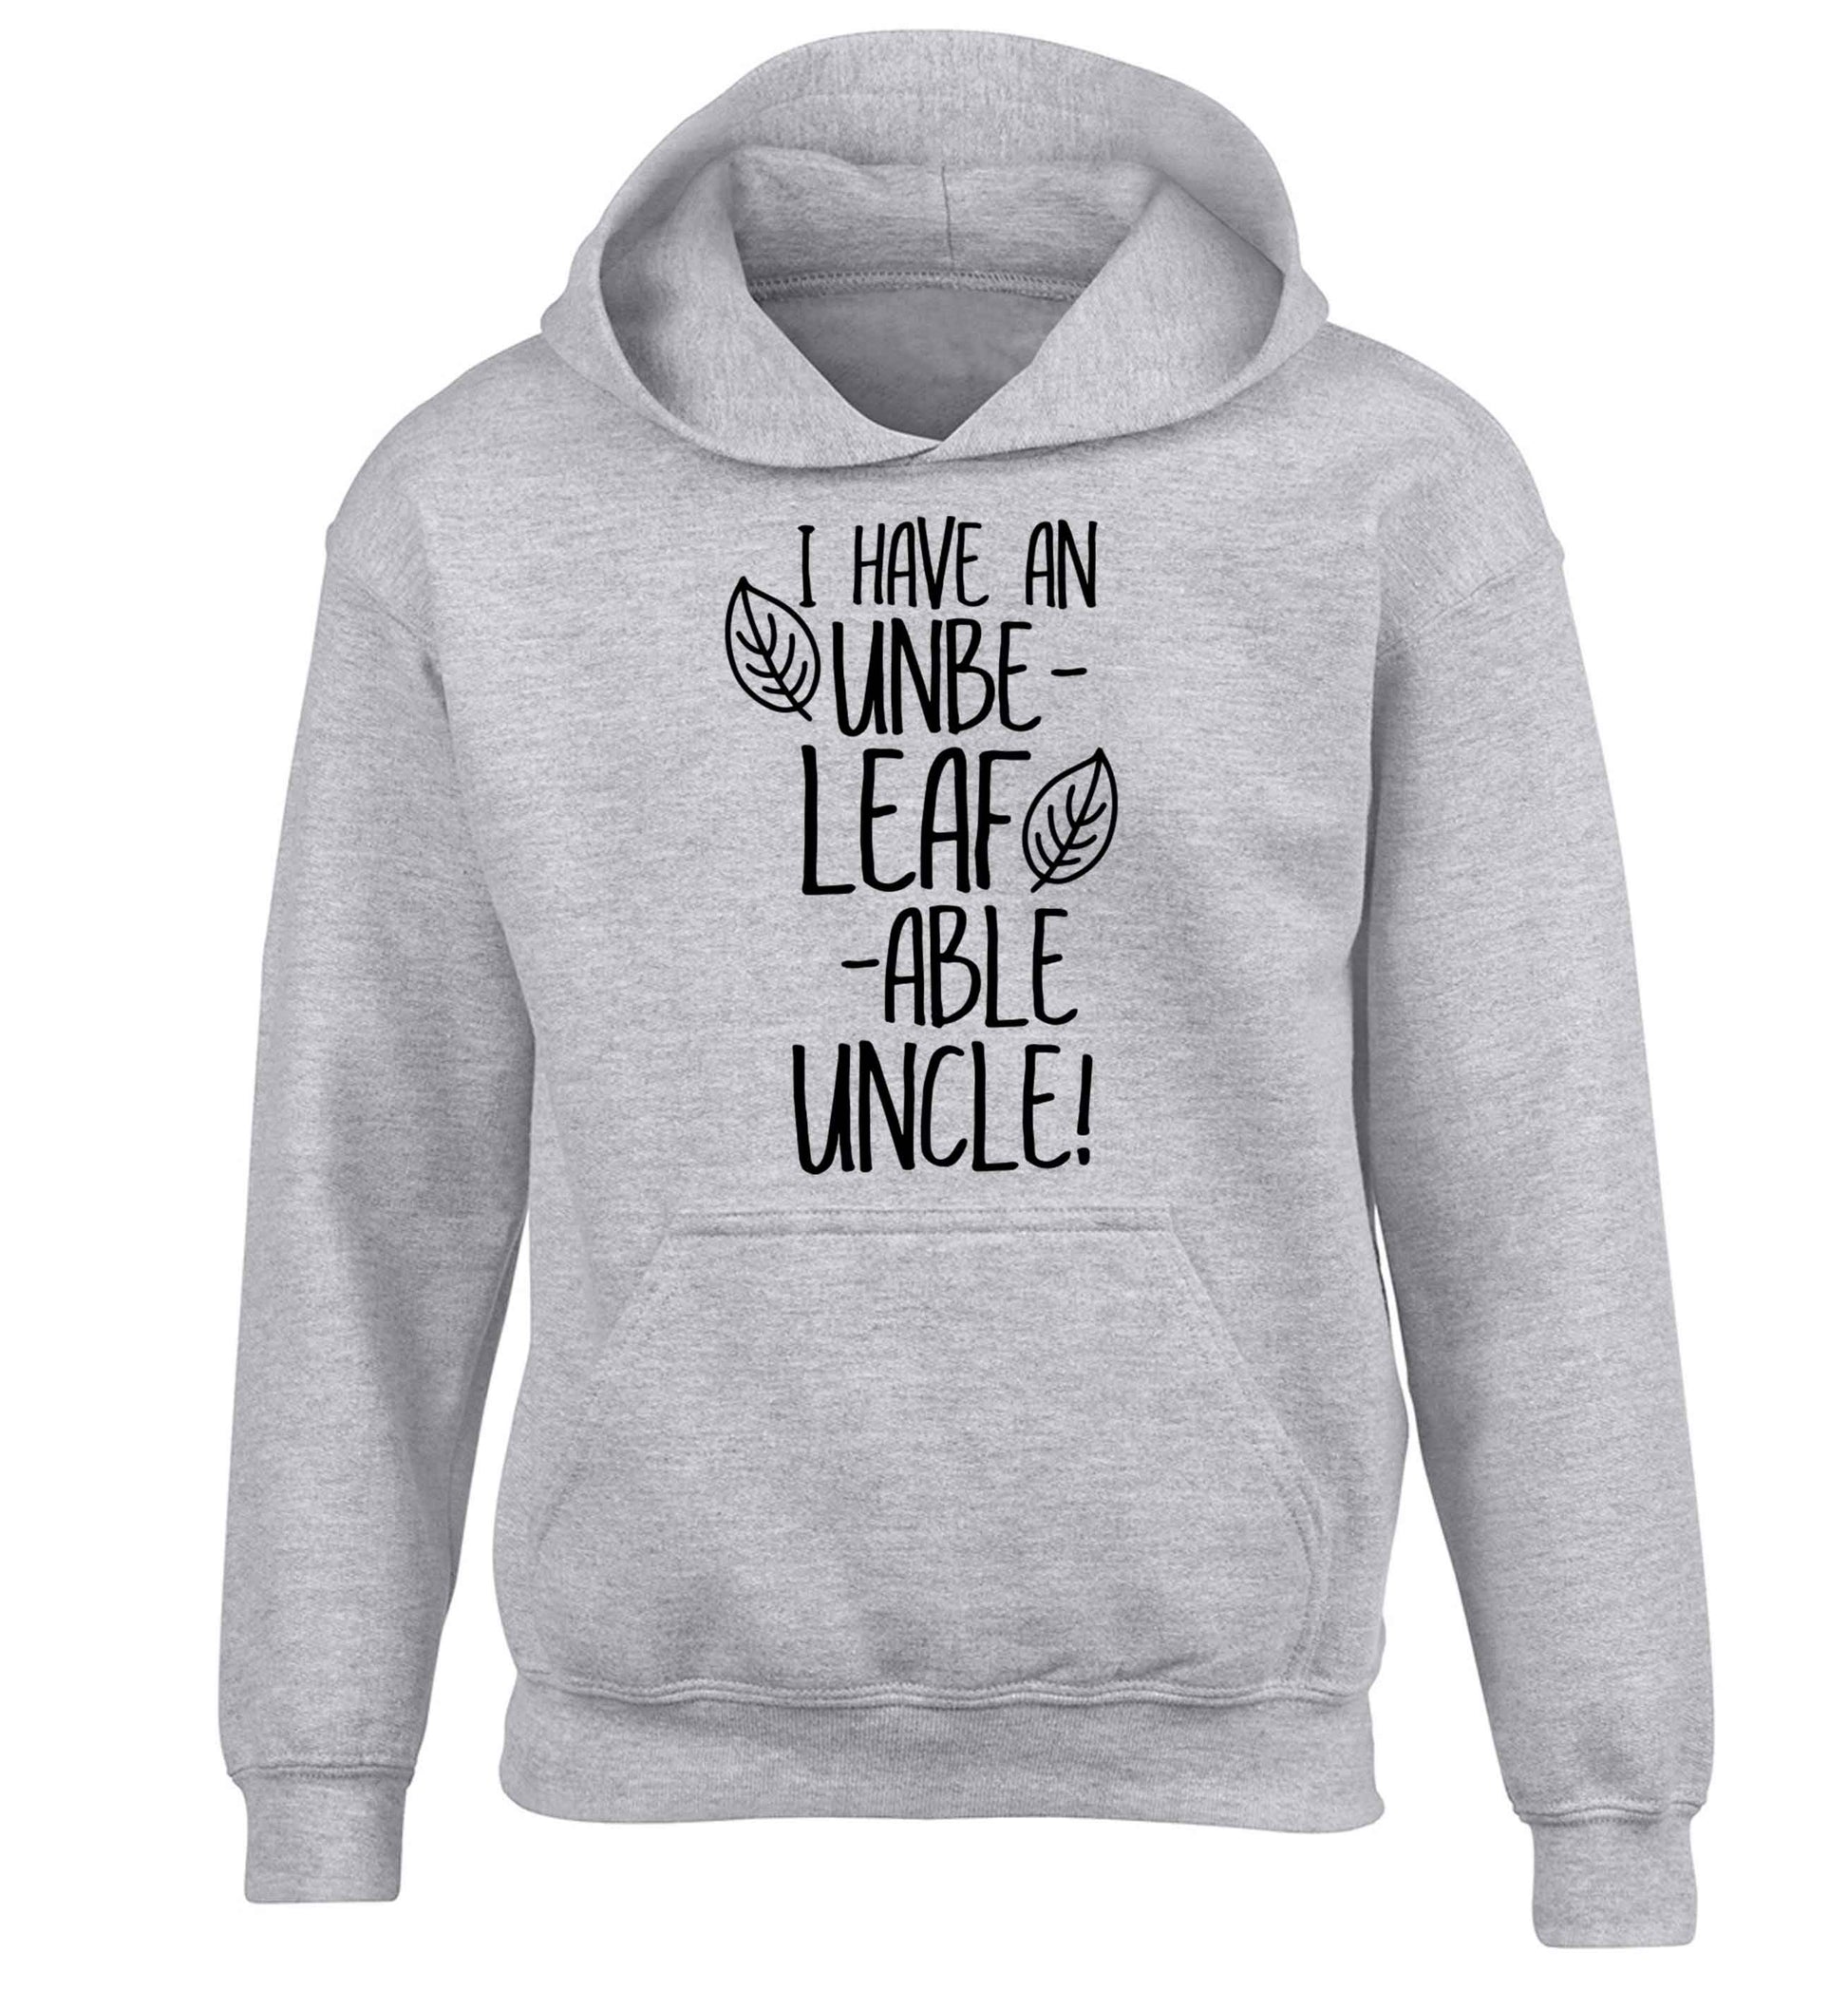 I have an unbe-leaf-able uncle children's grey hoodie 12-13 Years